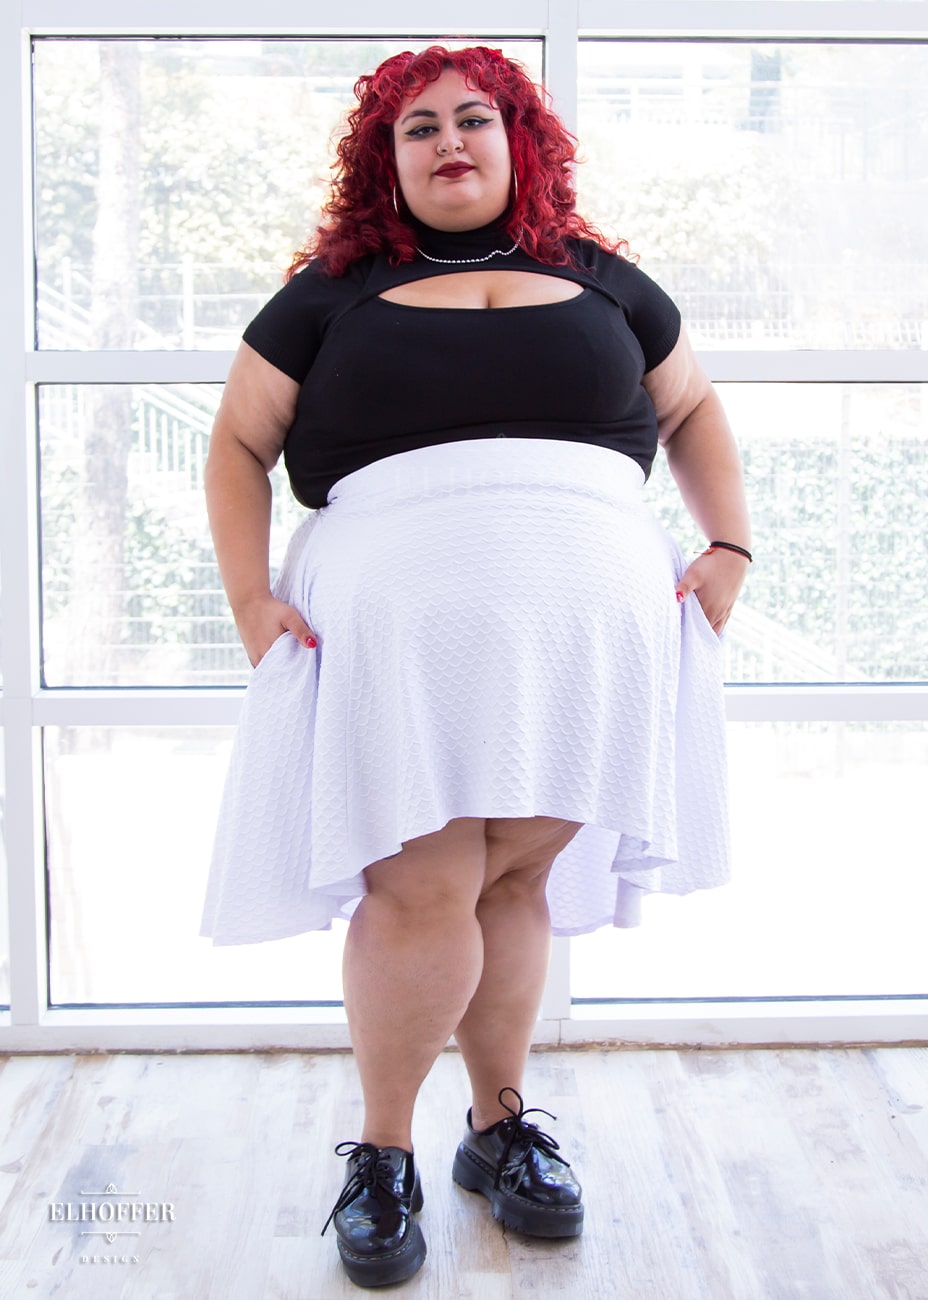 Victoria, an olive skinned size 4XL model with bright red curly hair, is wearing a high low skirt that hits the back of her knees with a two inch elastic covered waistband. The skirt is white with a raised scale texture.